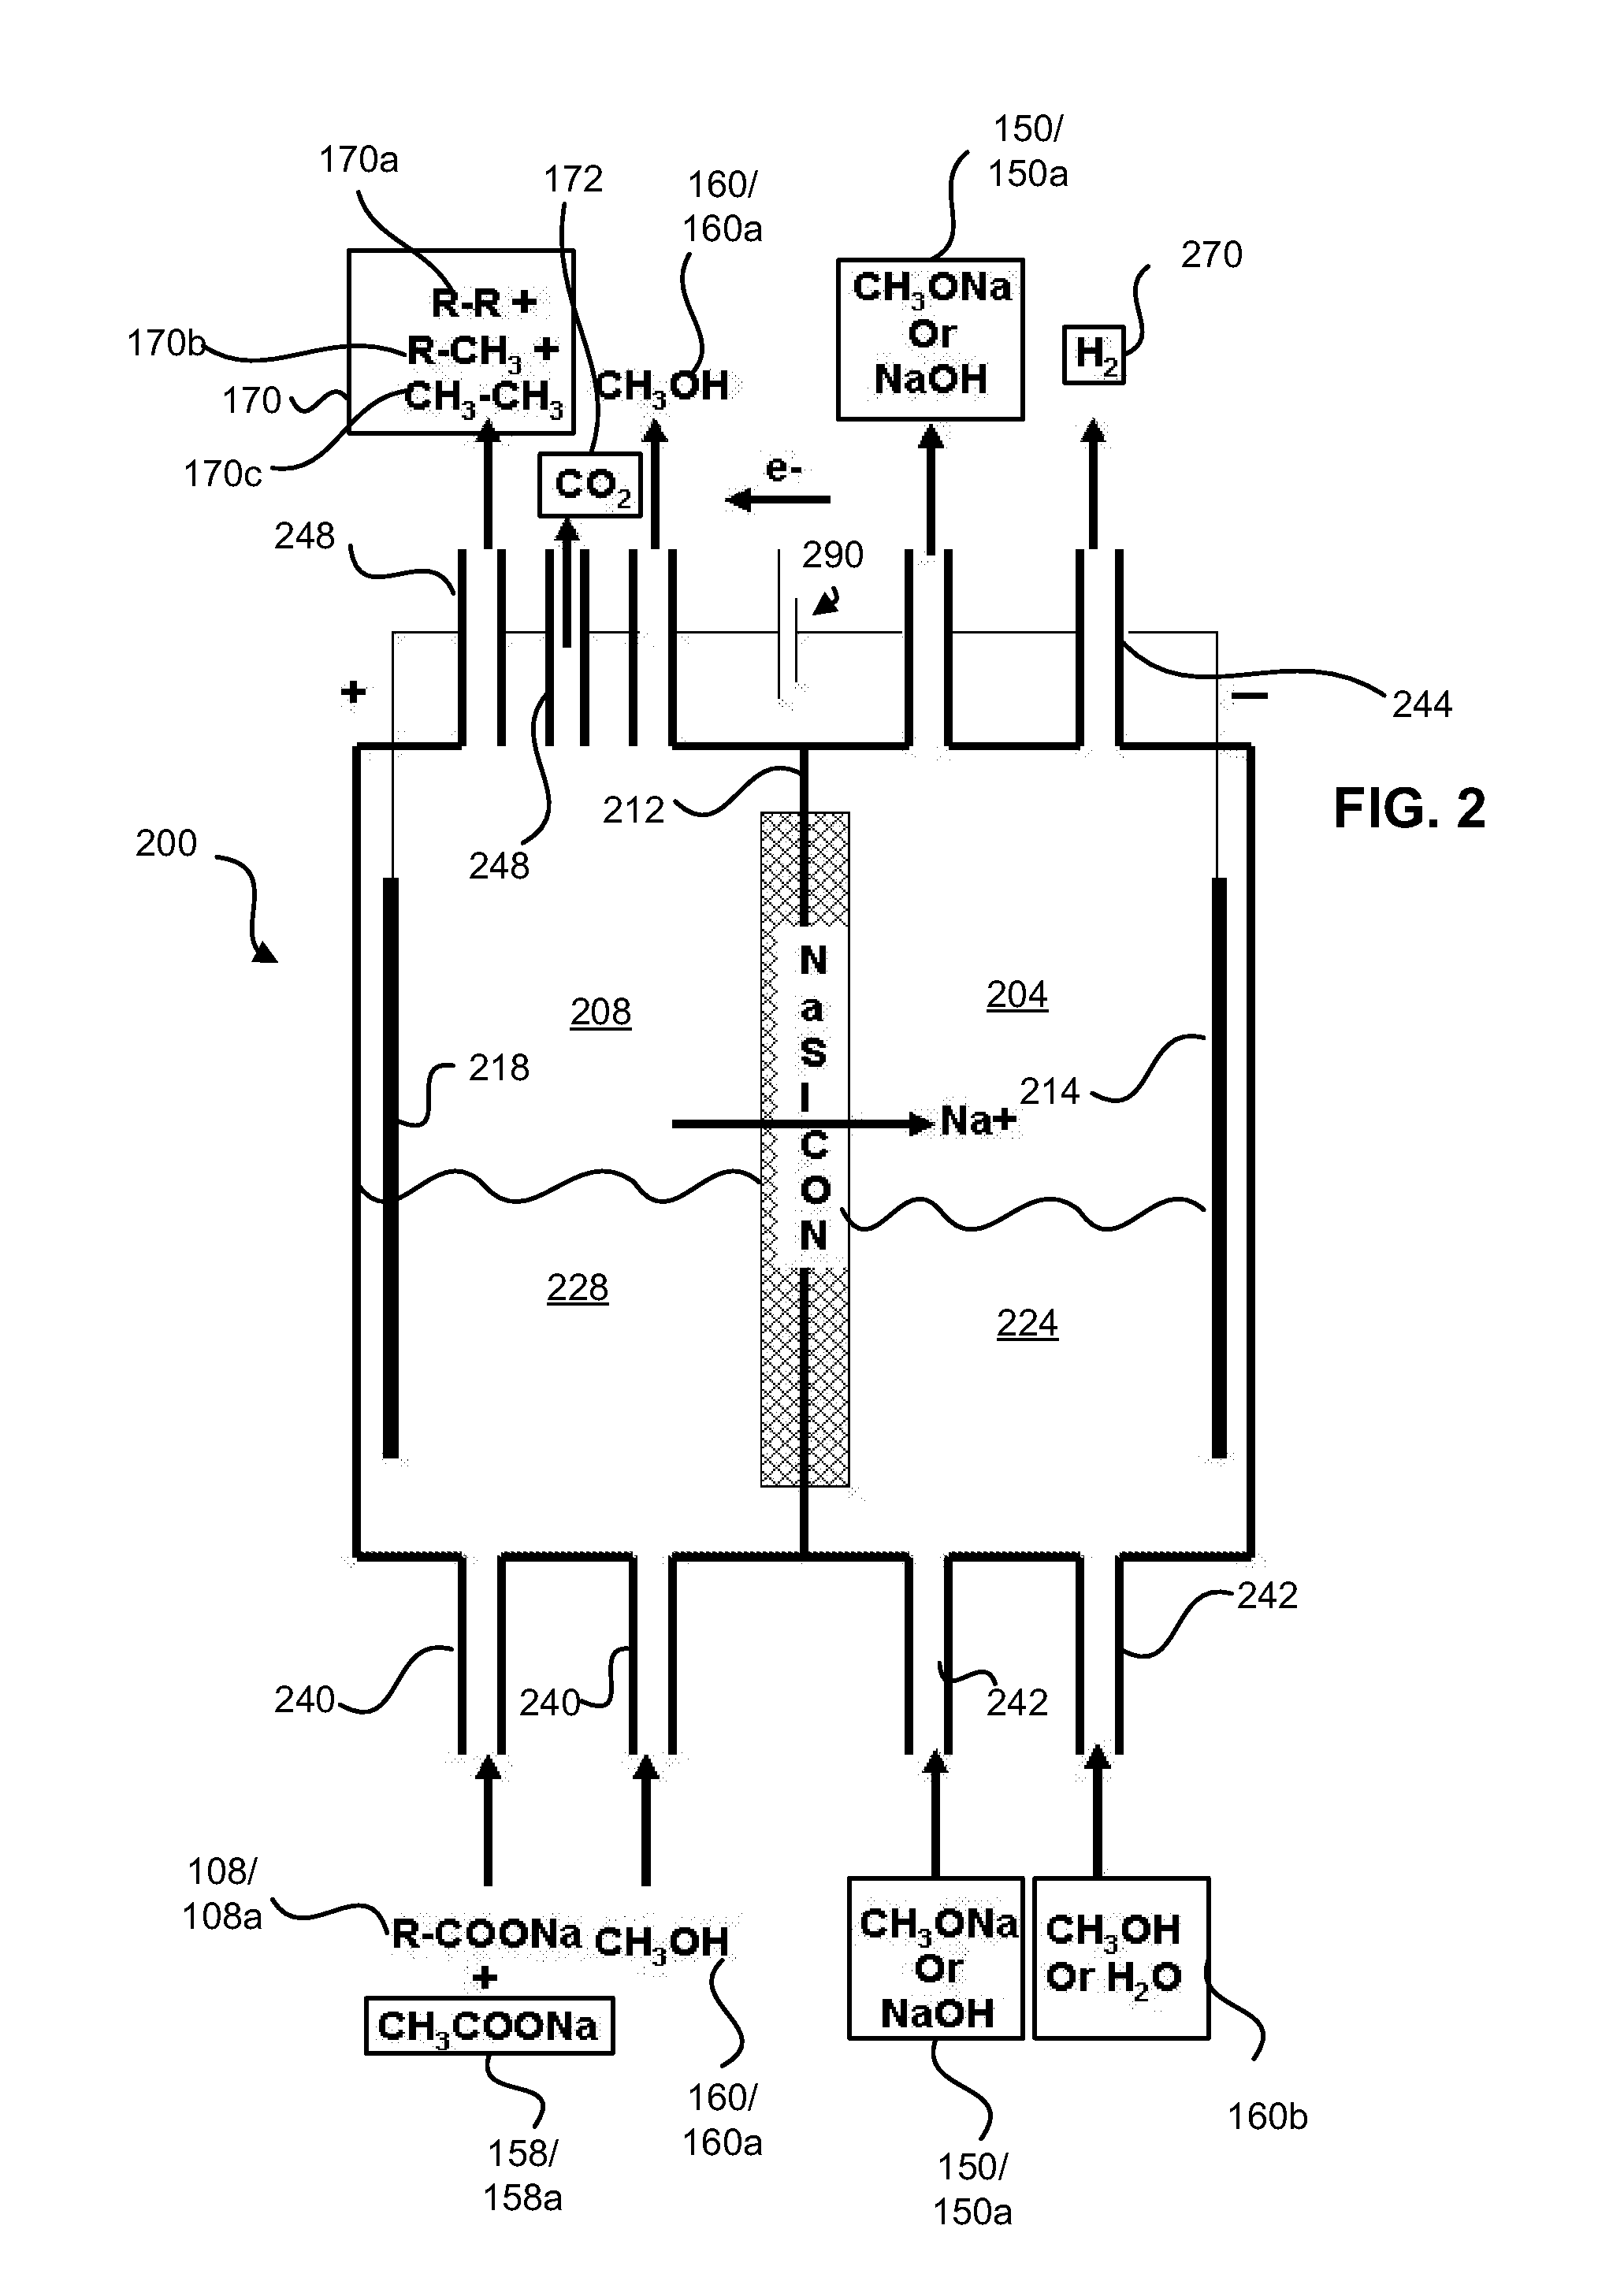 Method of producing coupled radical products from biomass